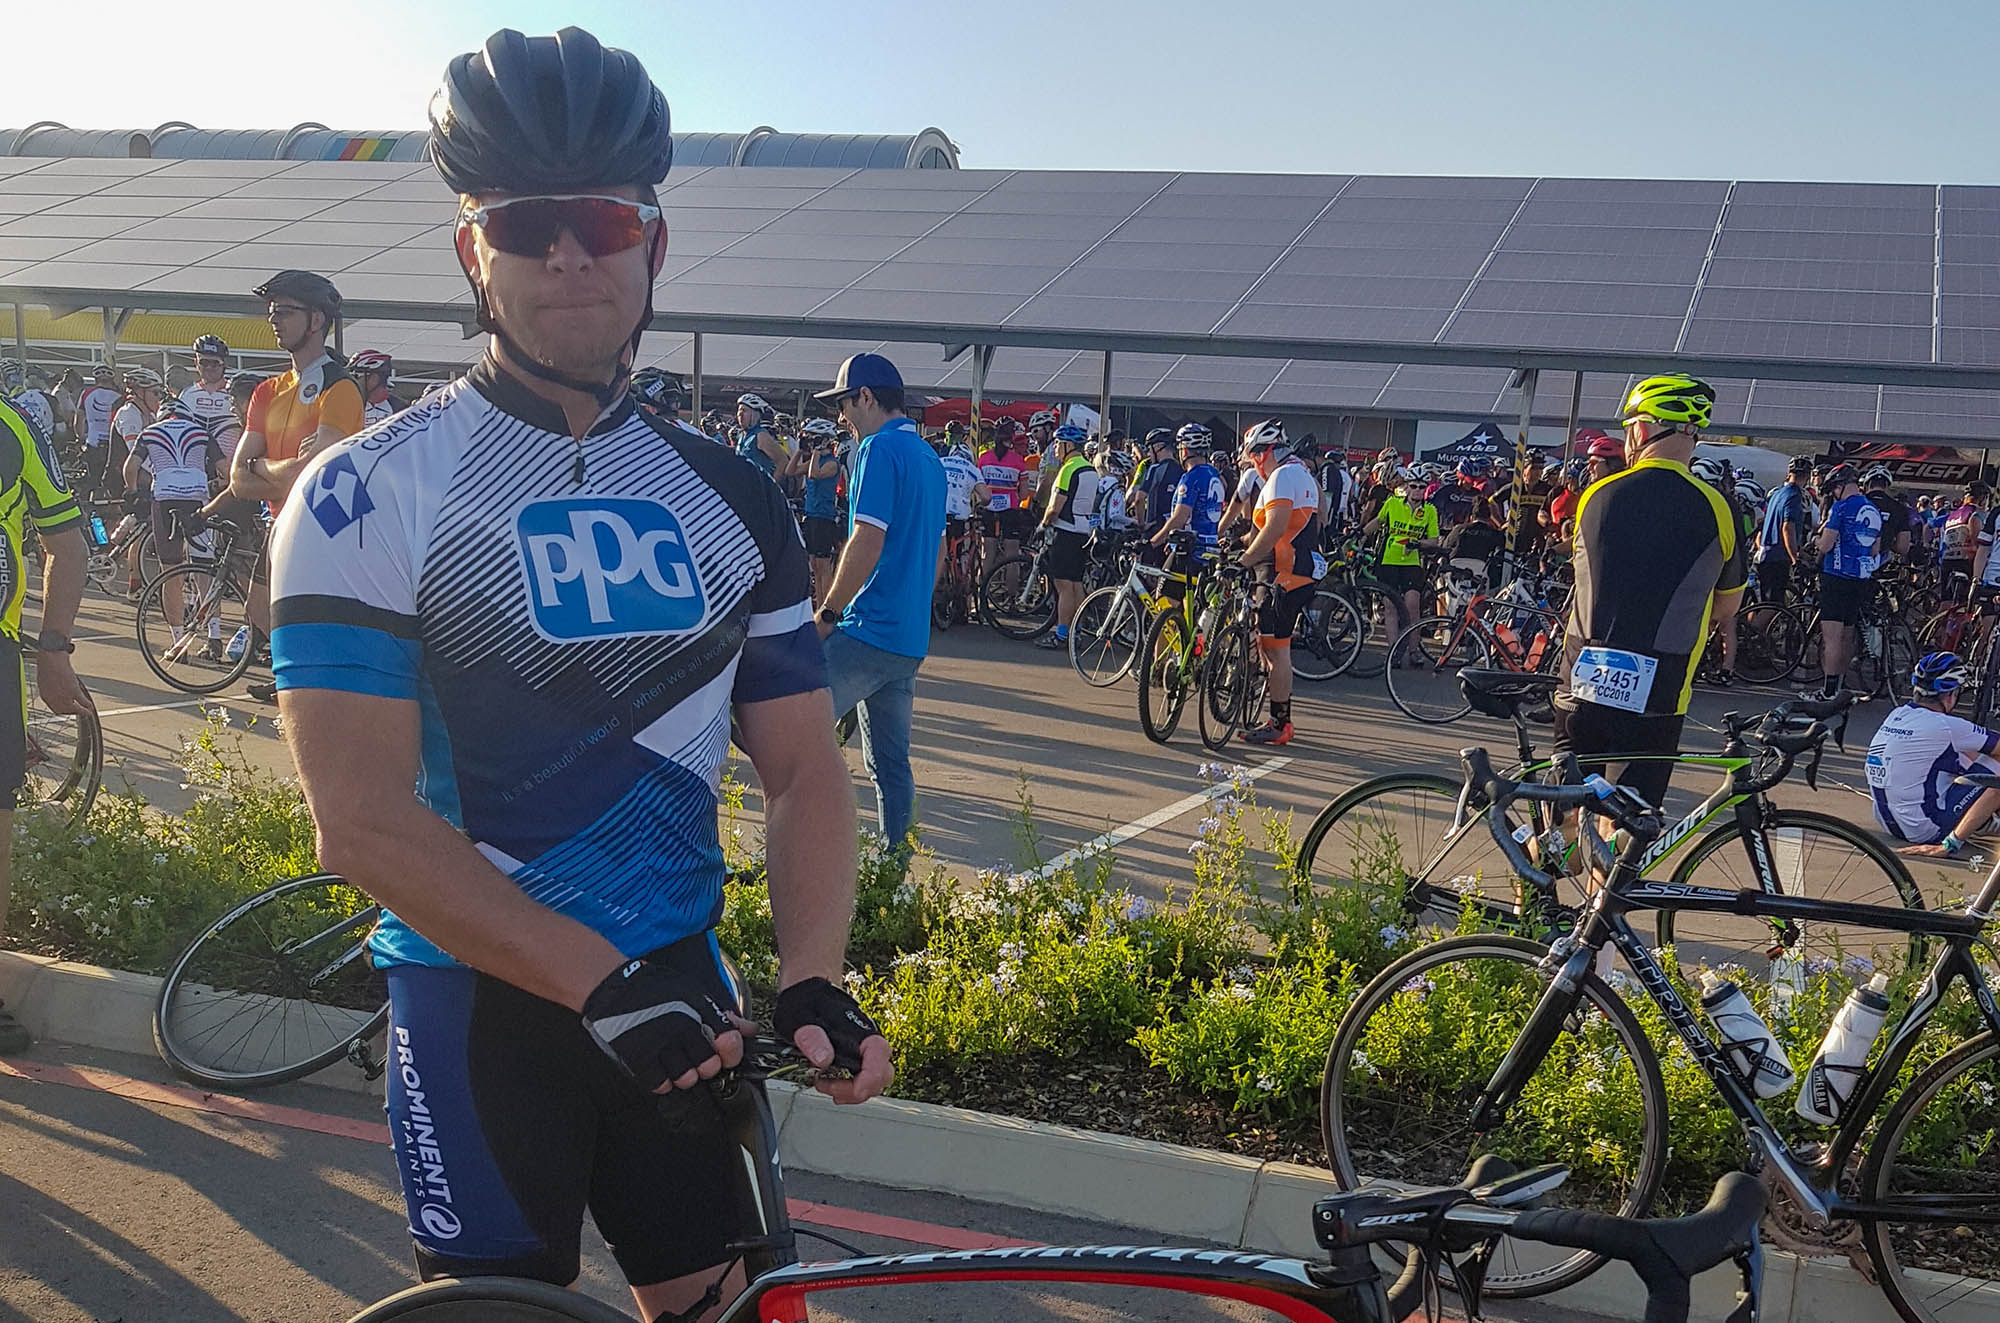 ppg-2020-pieter-de-vries-south-africa-ppgproud-prominent-paints-cycling_upd.jpg